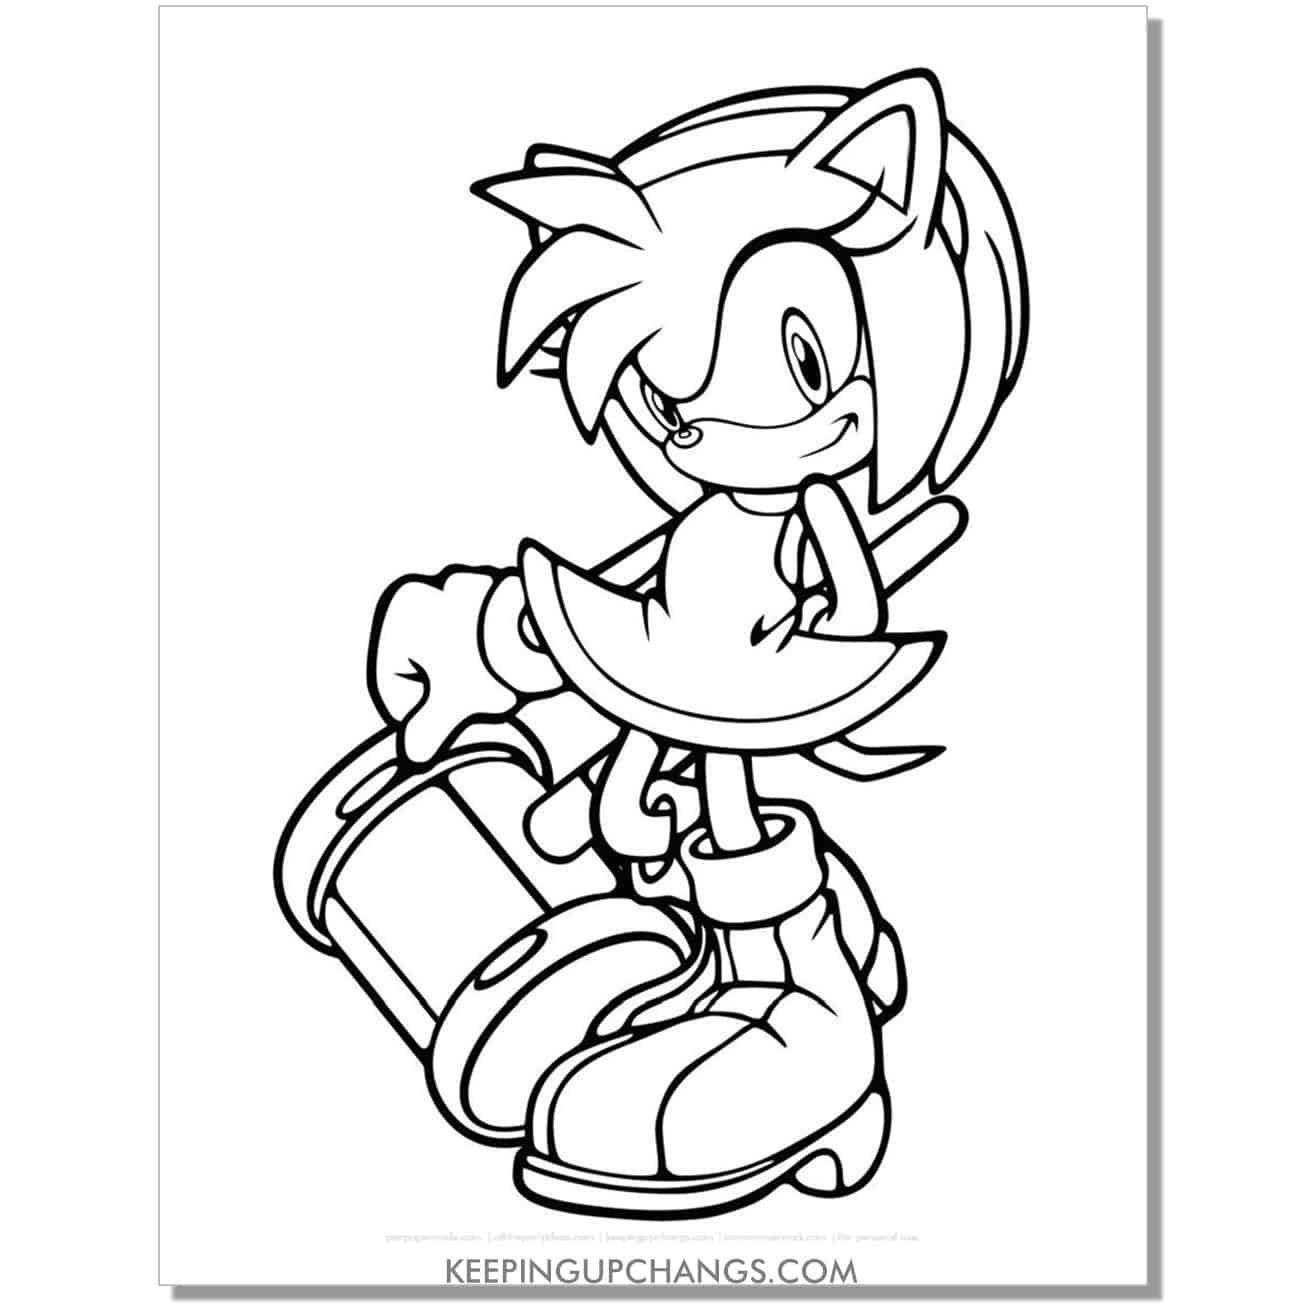 amy rose with hammer at side sonic coloring page.